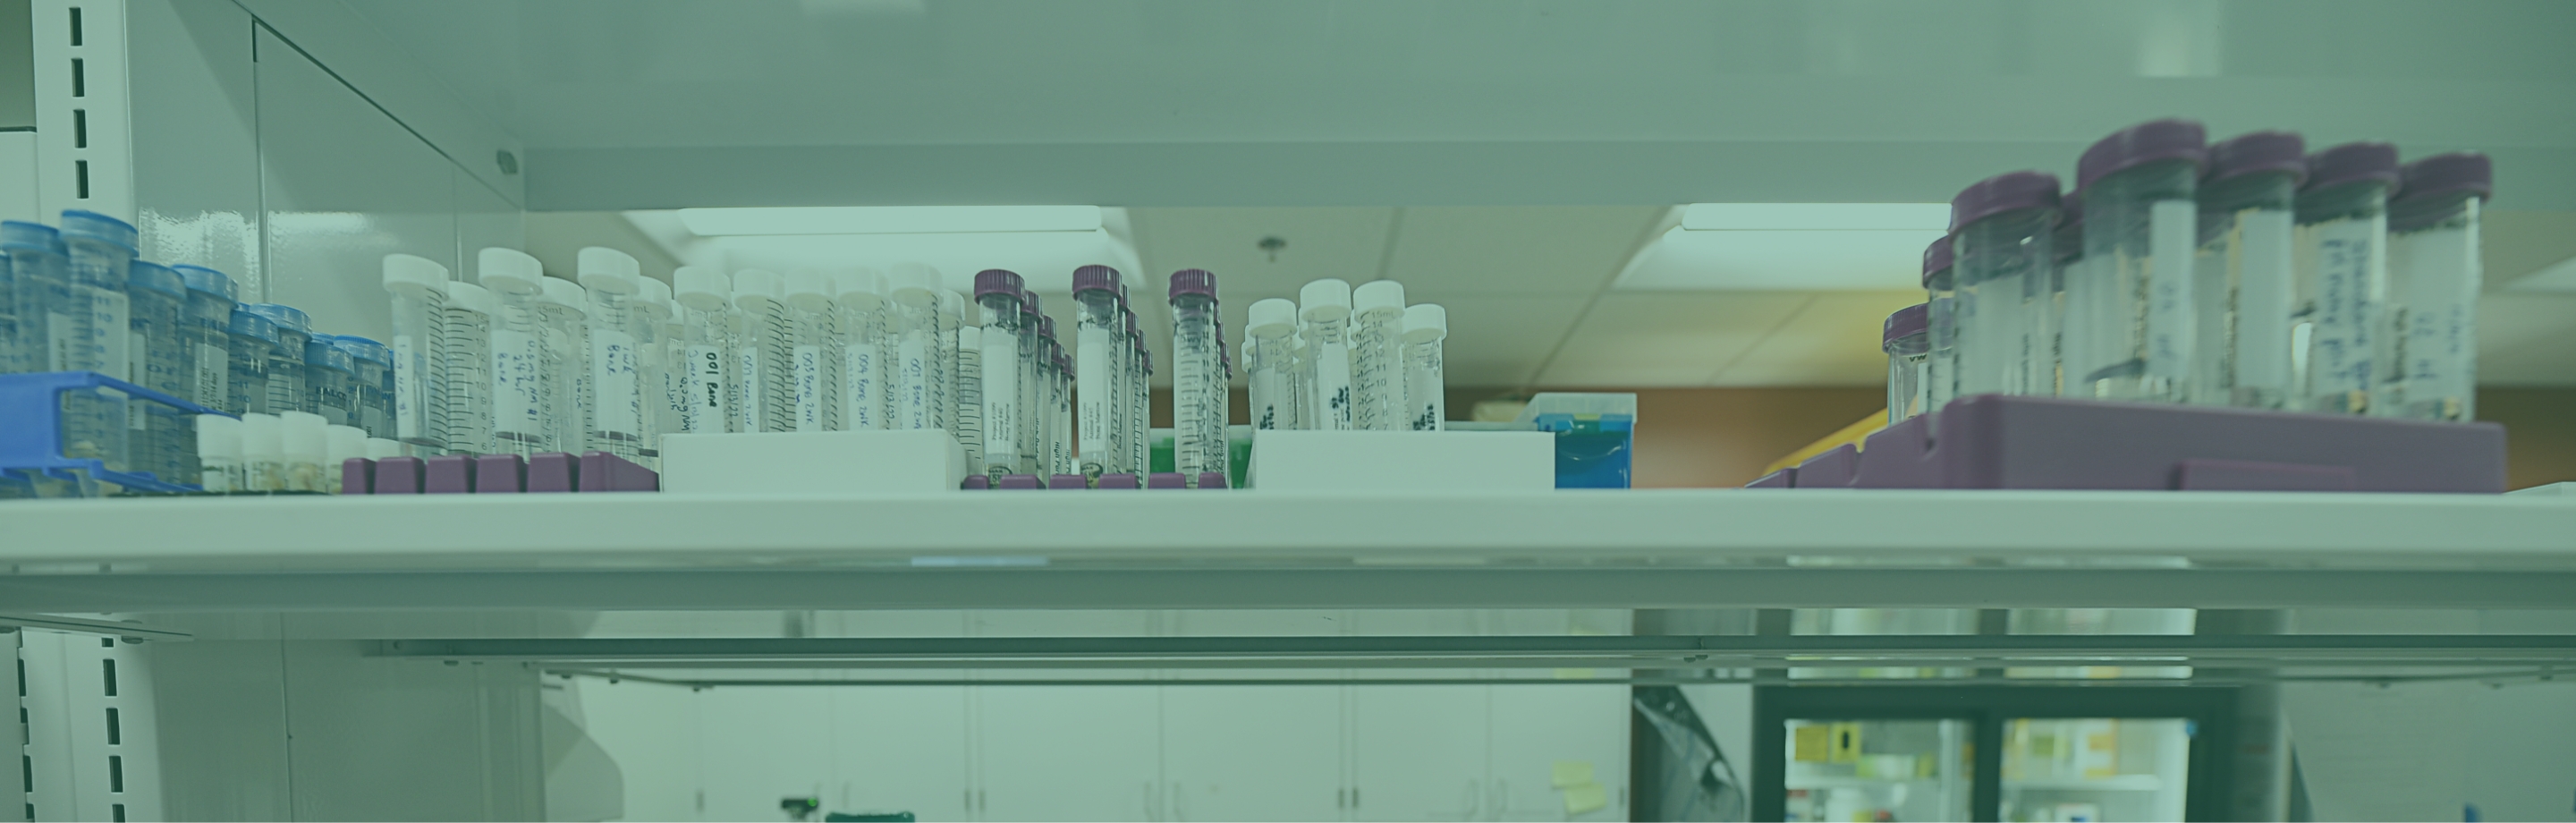 test tubes on a shelf in a lab environment